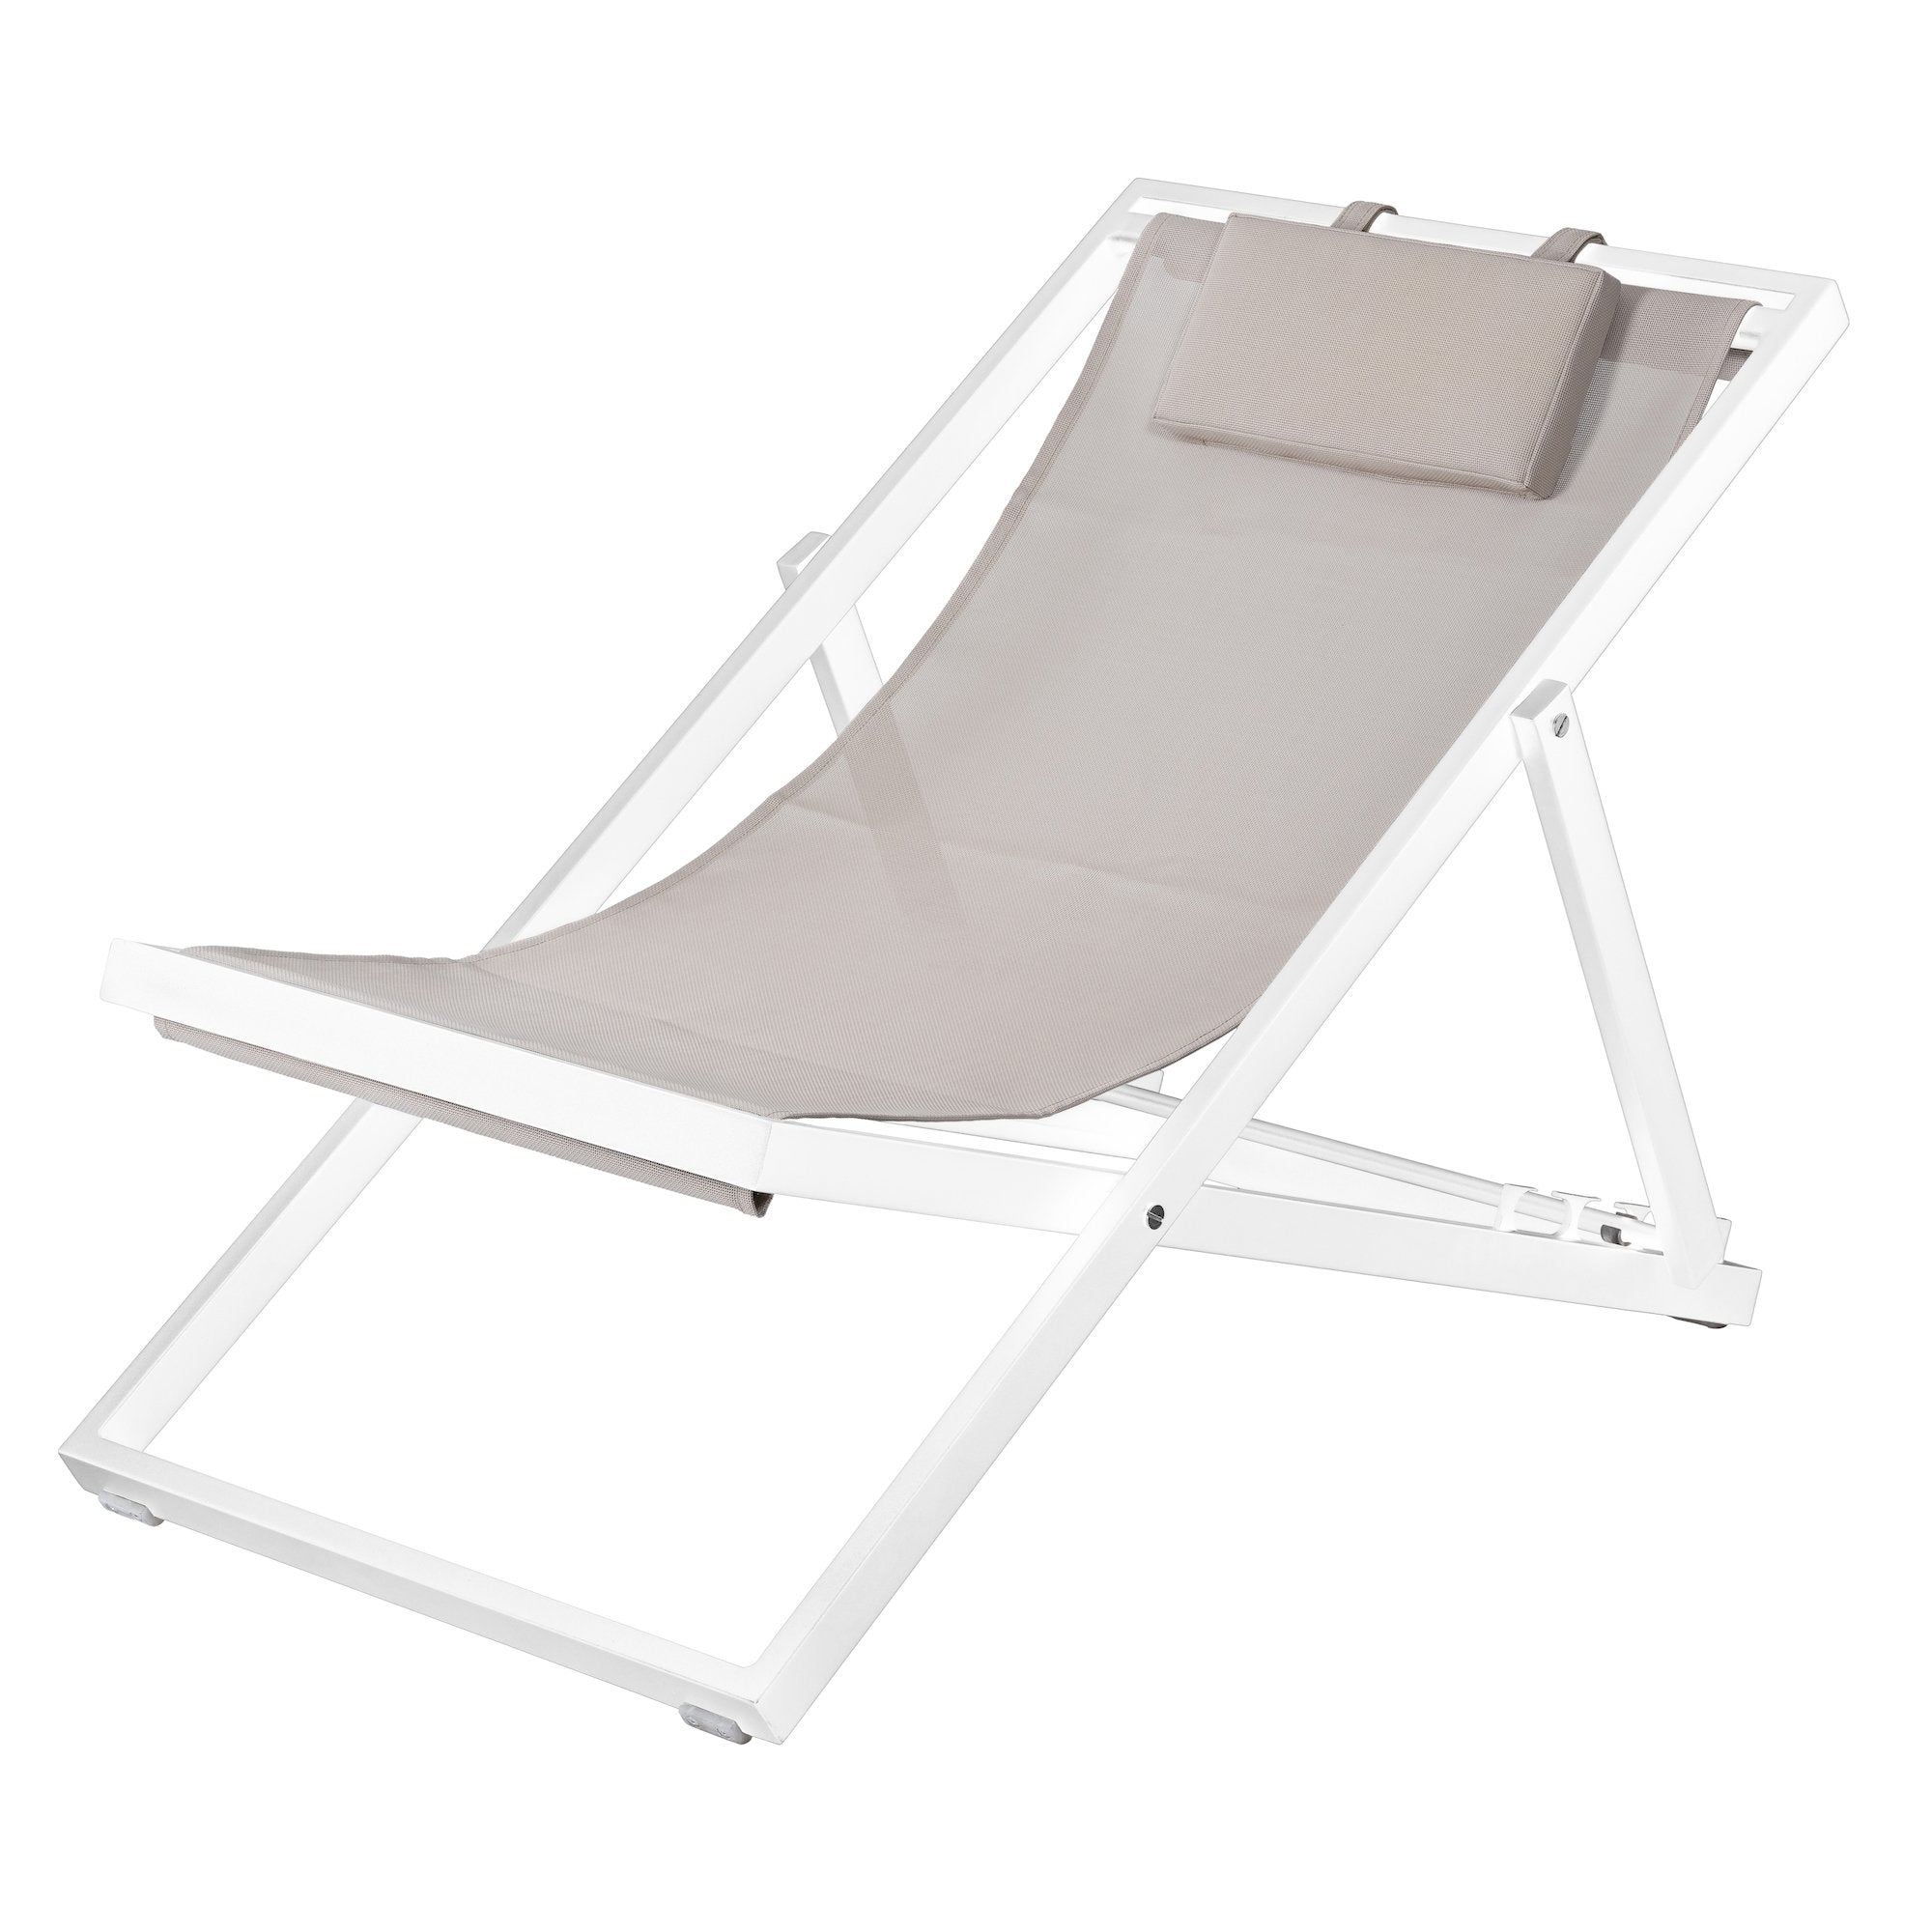 Durasheds Duramax Newport Lounger for Patio